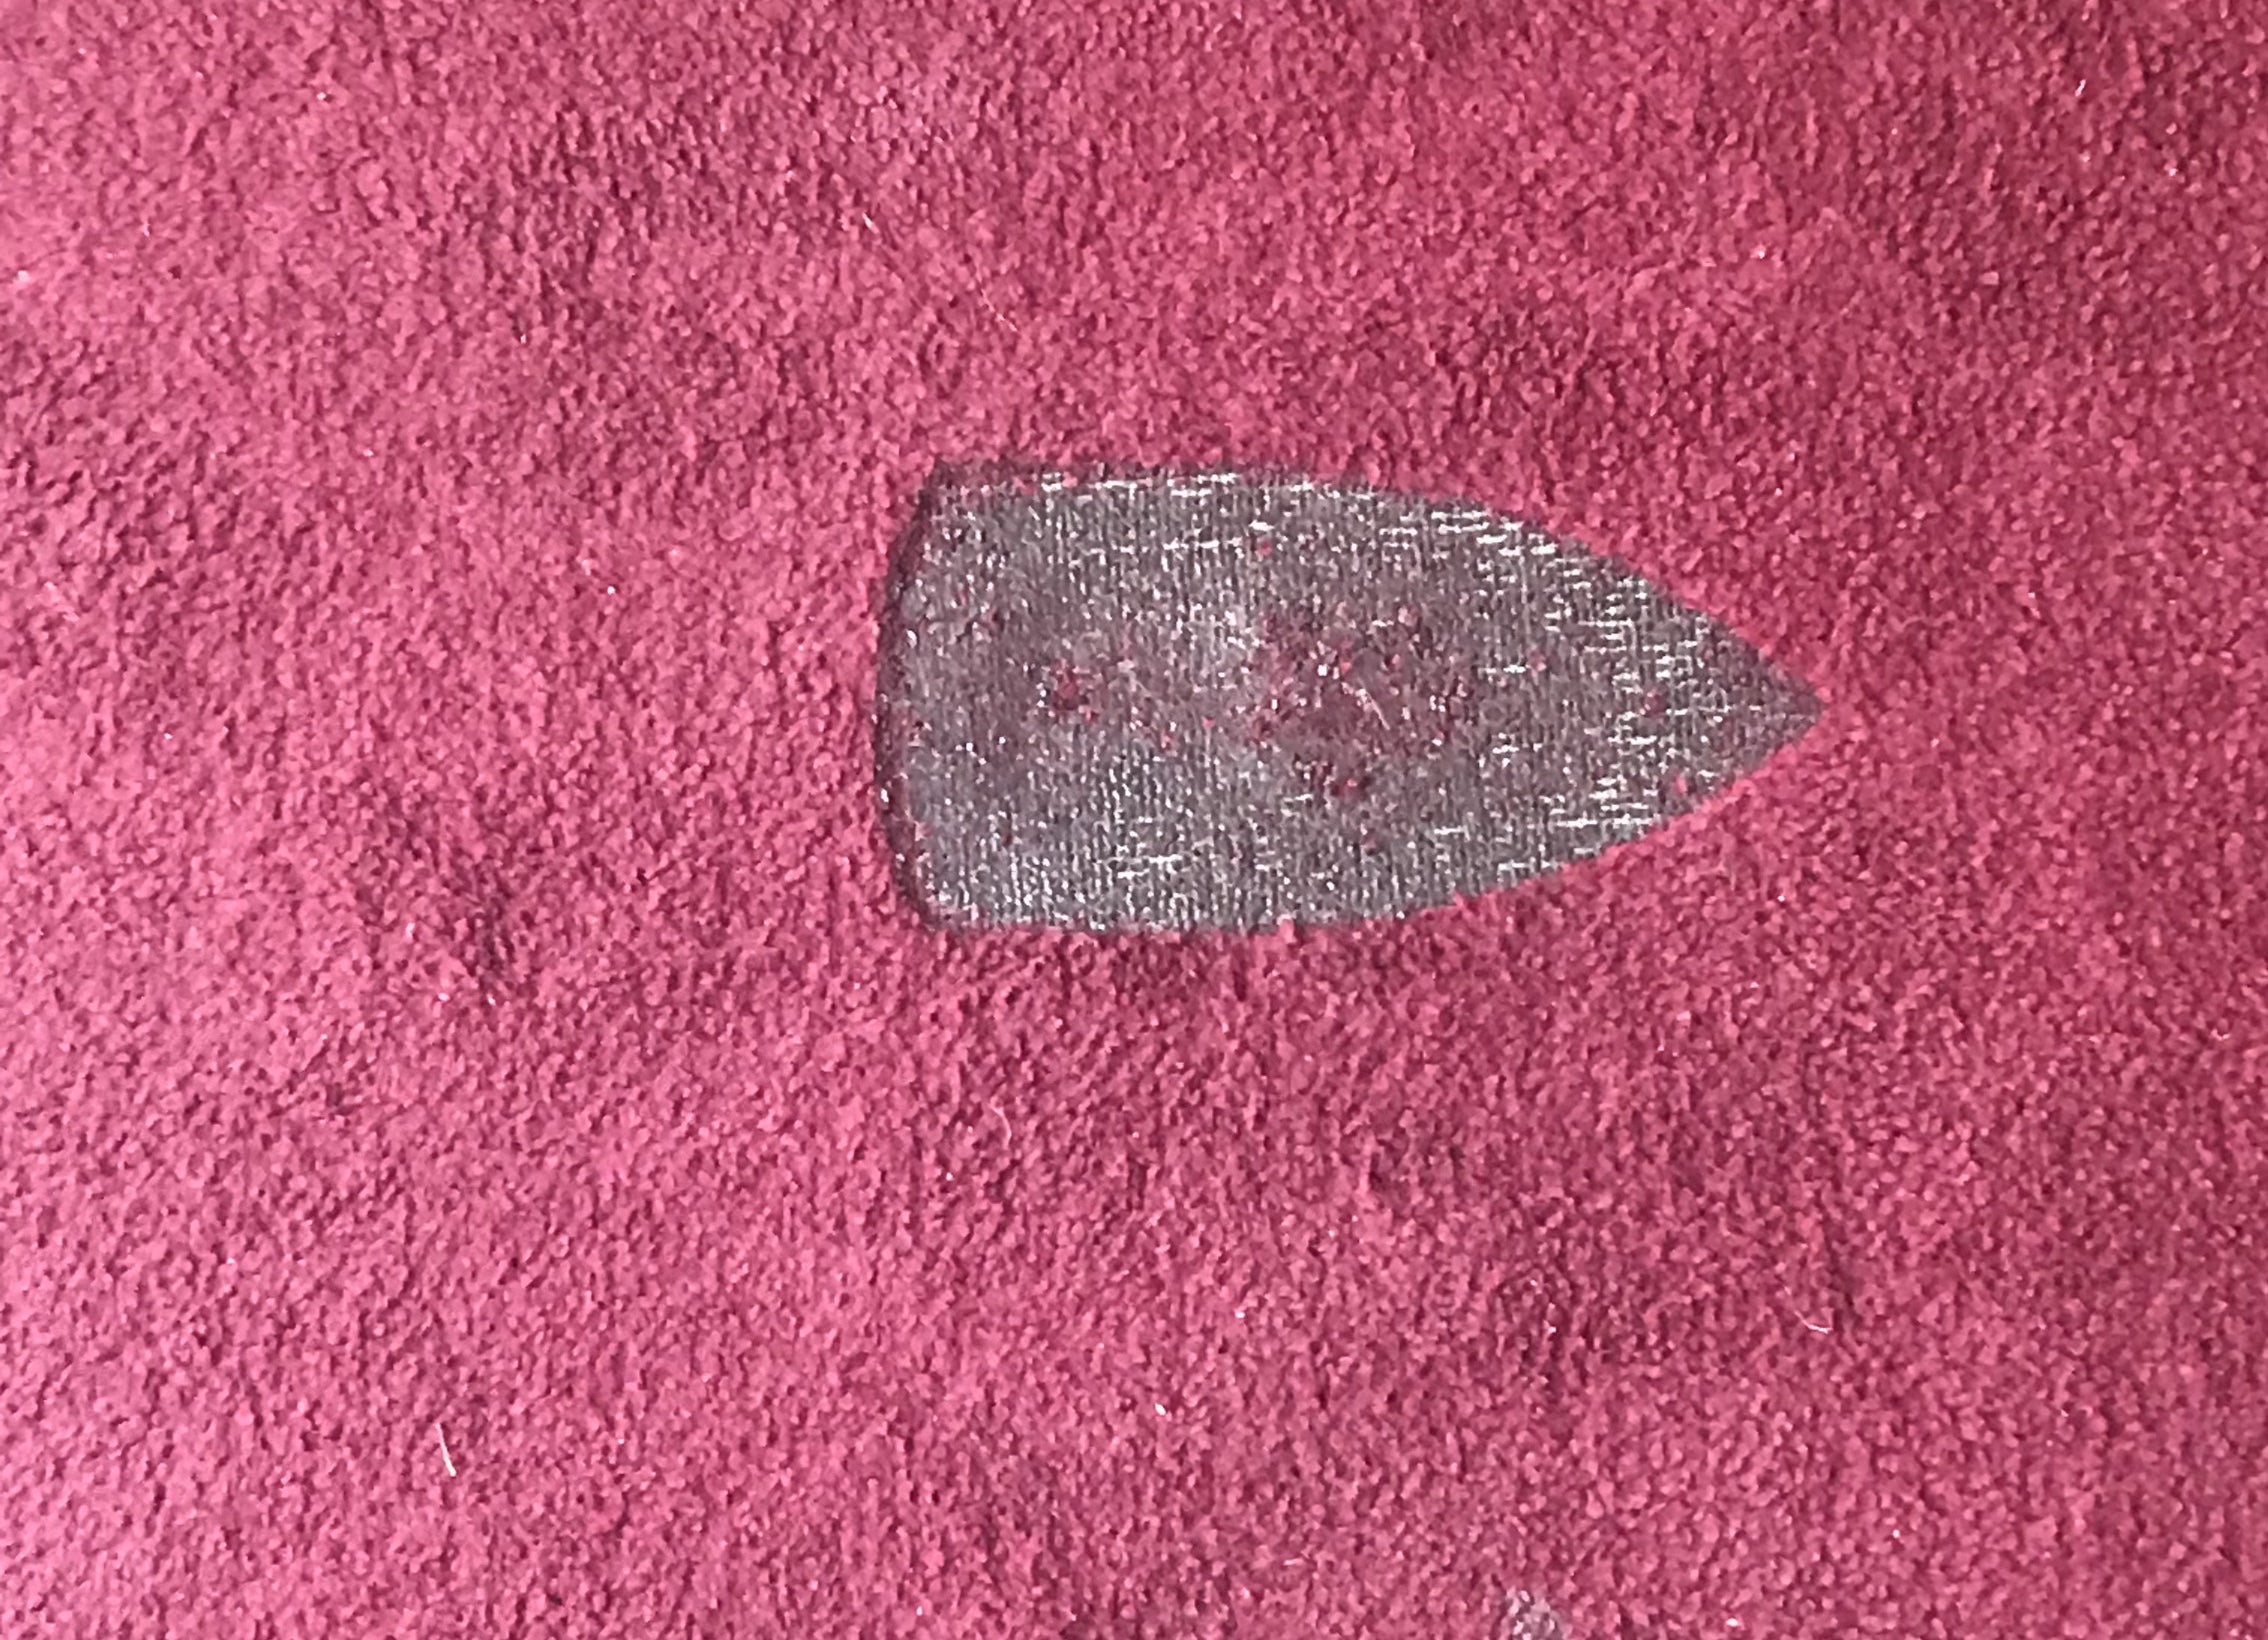 a clothes iron shaped burn mark in a carpet